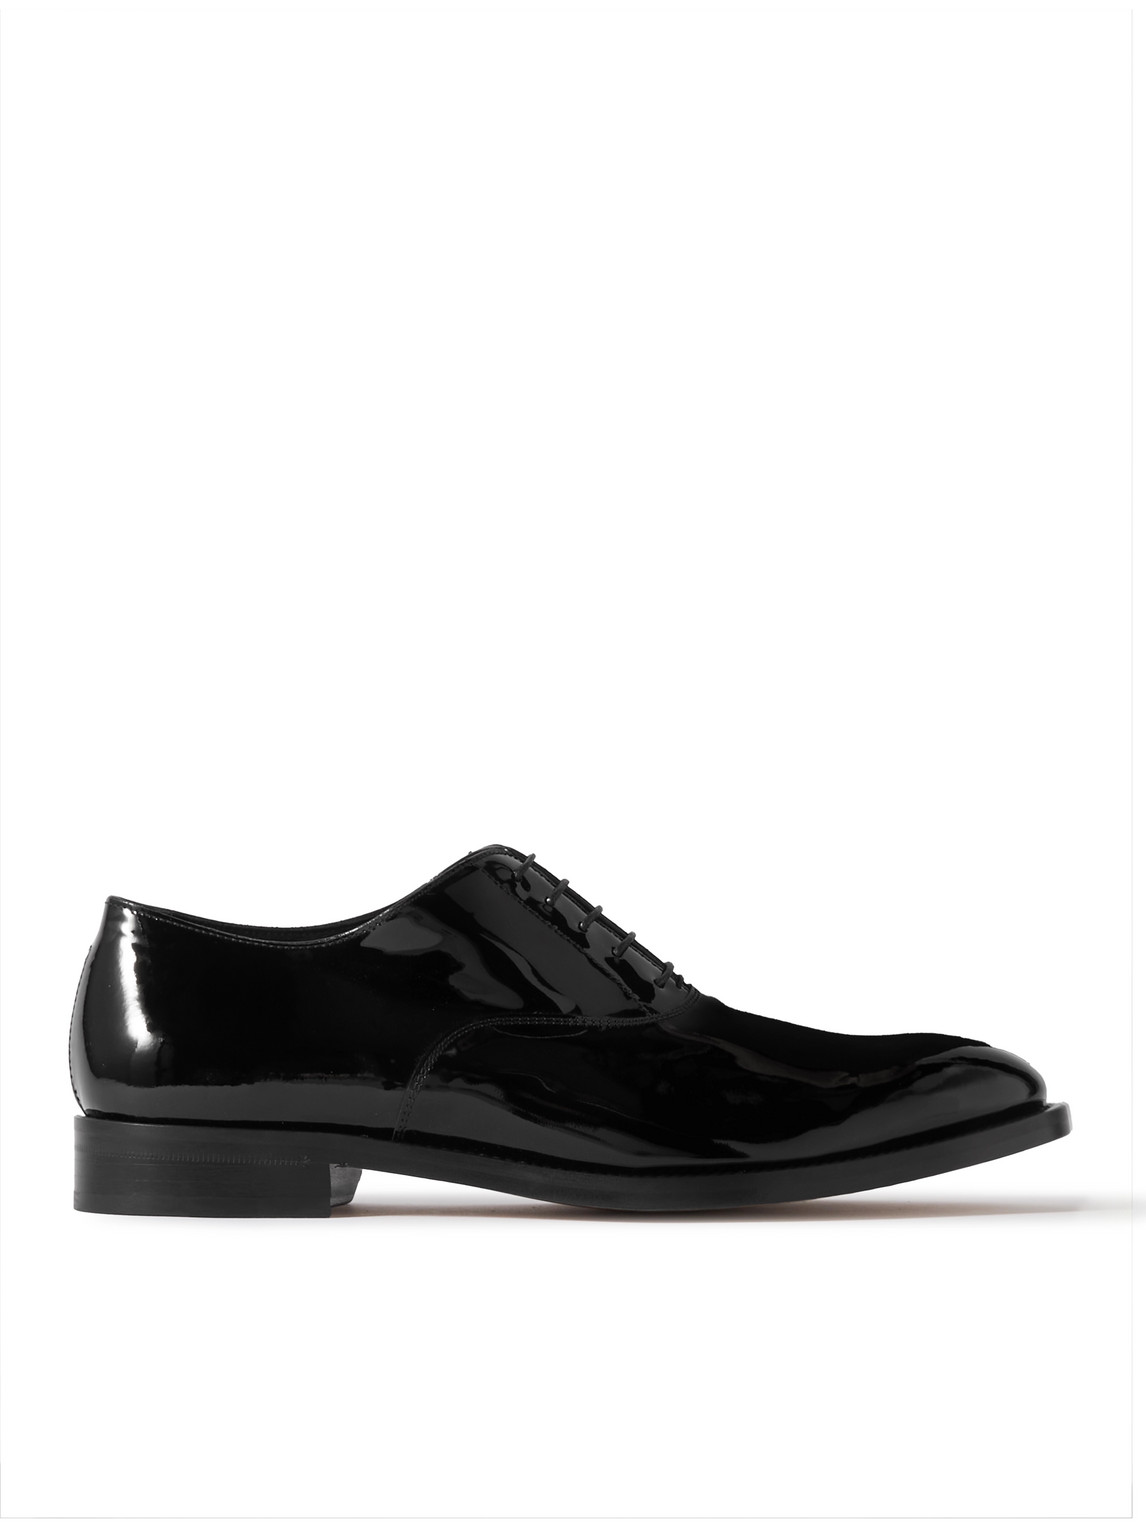 Paul Smith Gershwin Patent-leather Oxford Shoes In Black